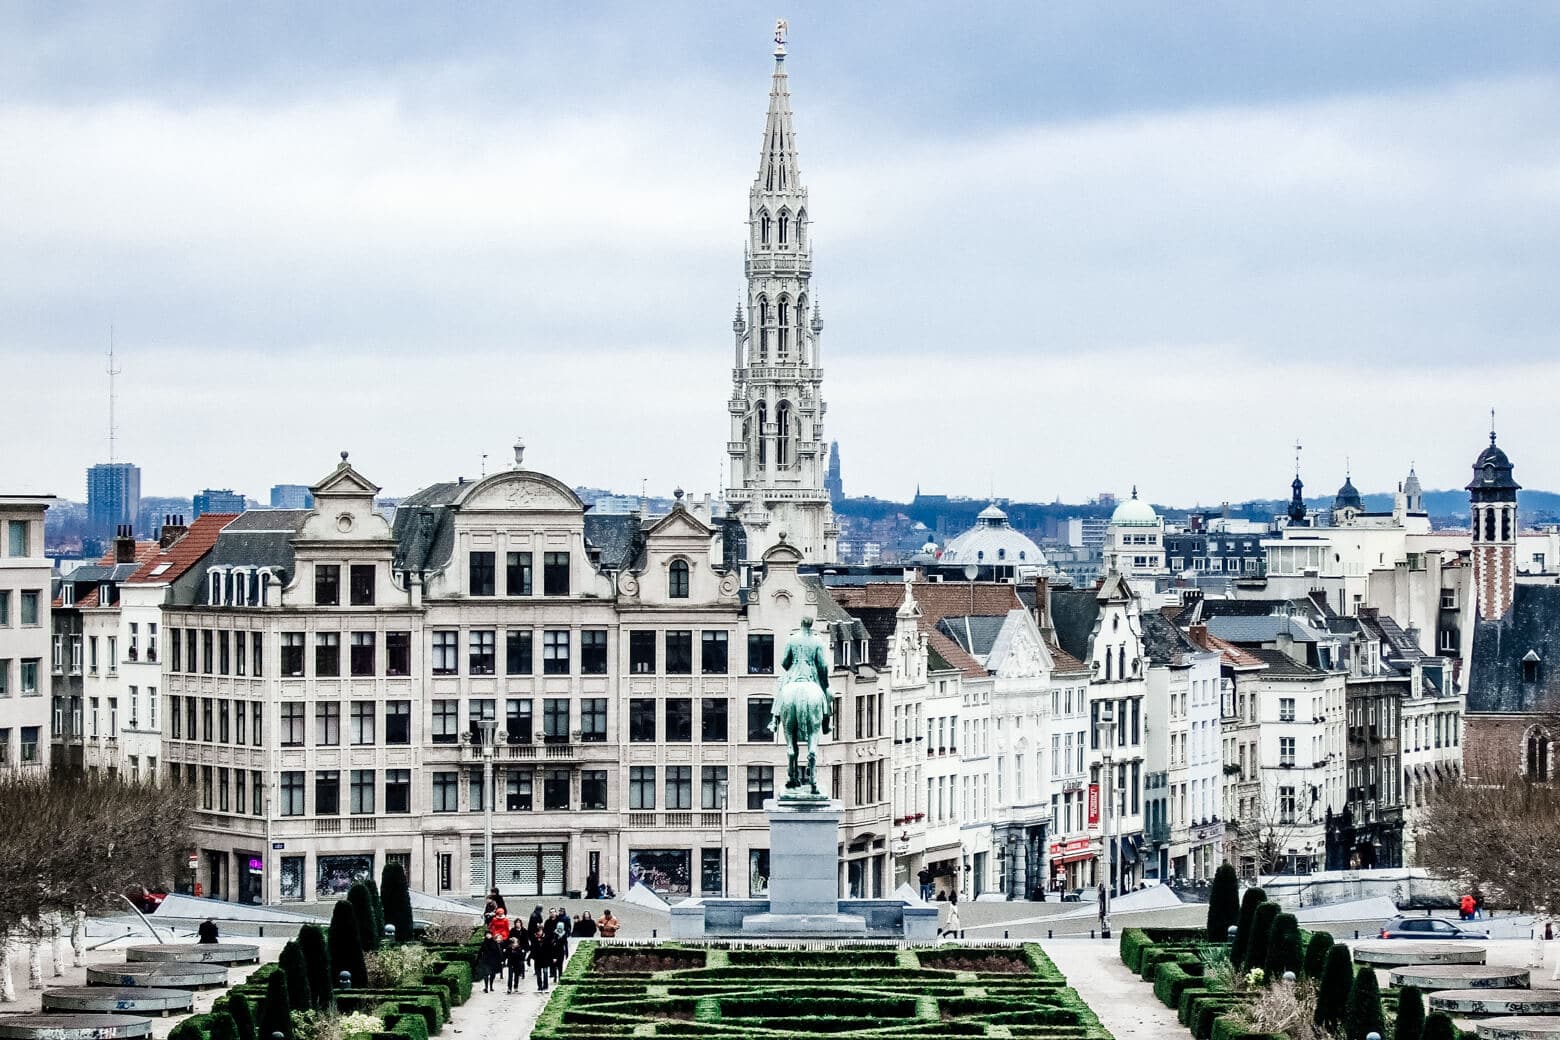 Central Brussels